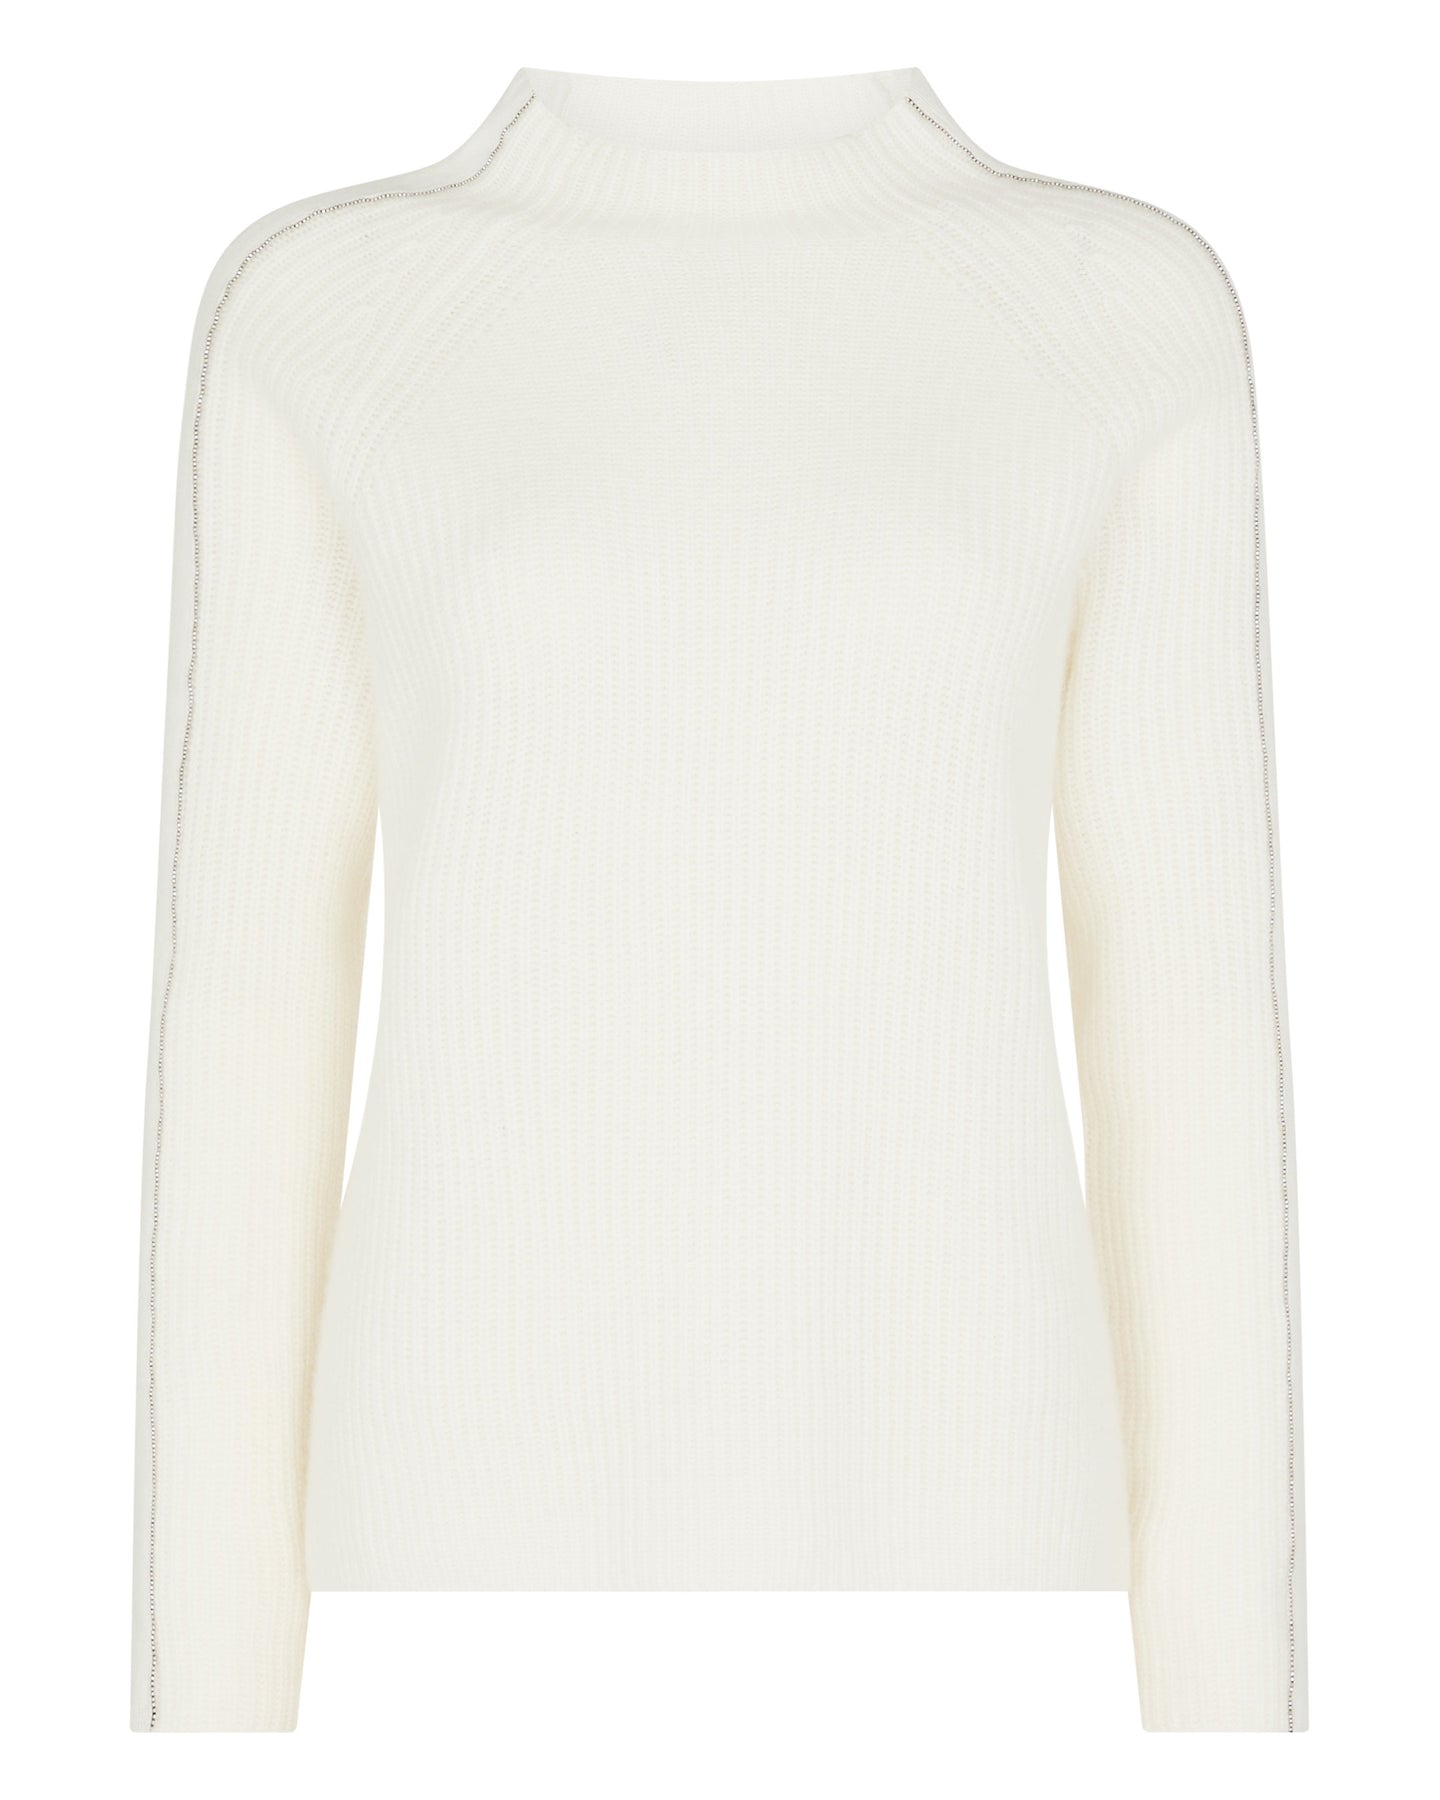 N.Peal Women's Metal Trim Funnel Neck Cashmere Jumper New Ivory White